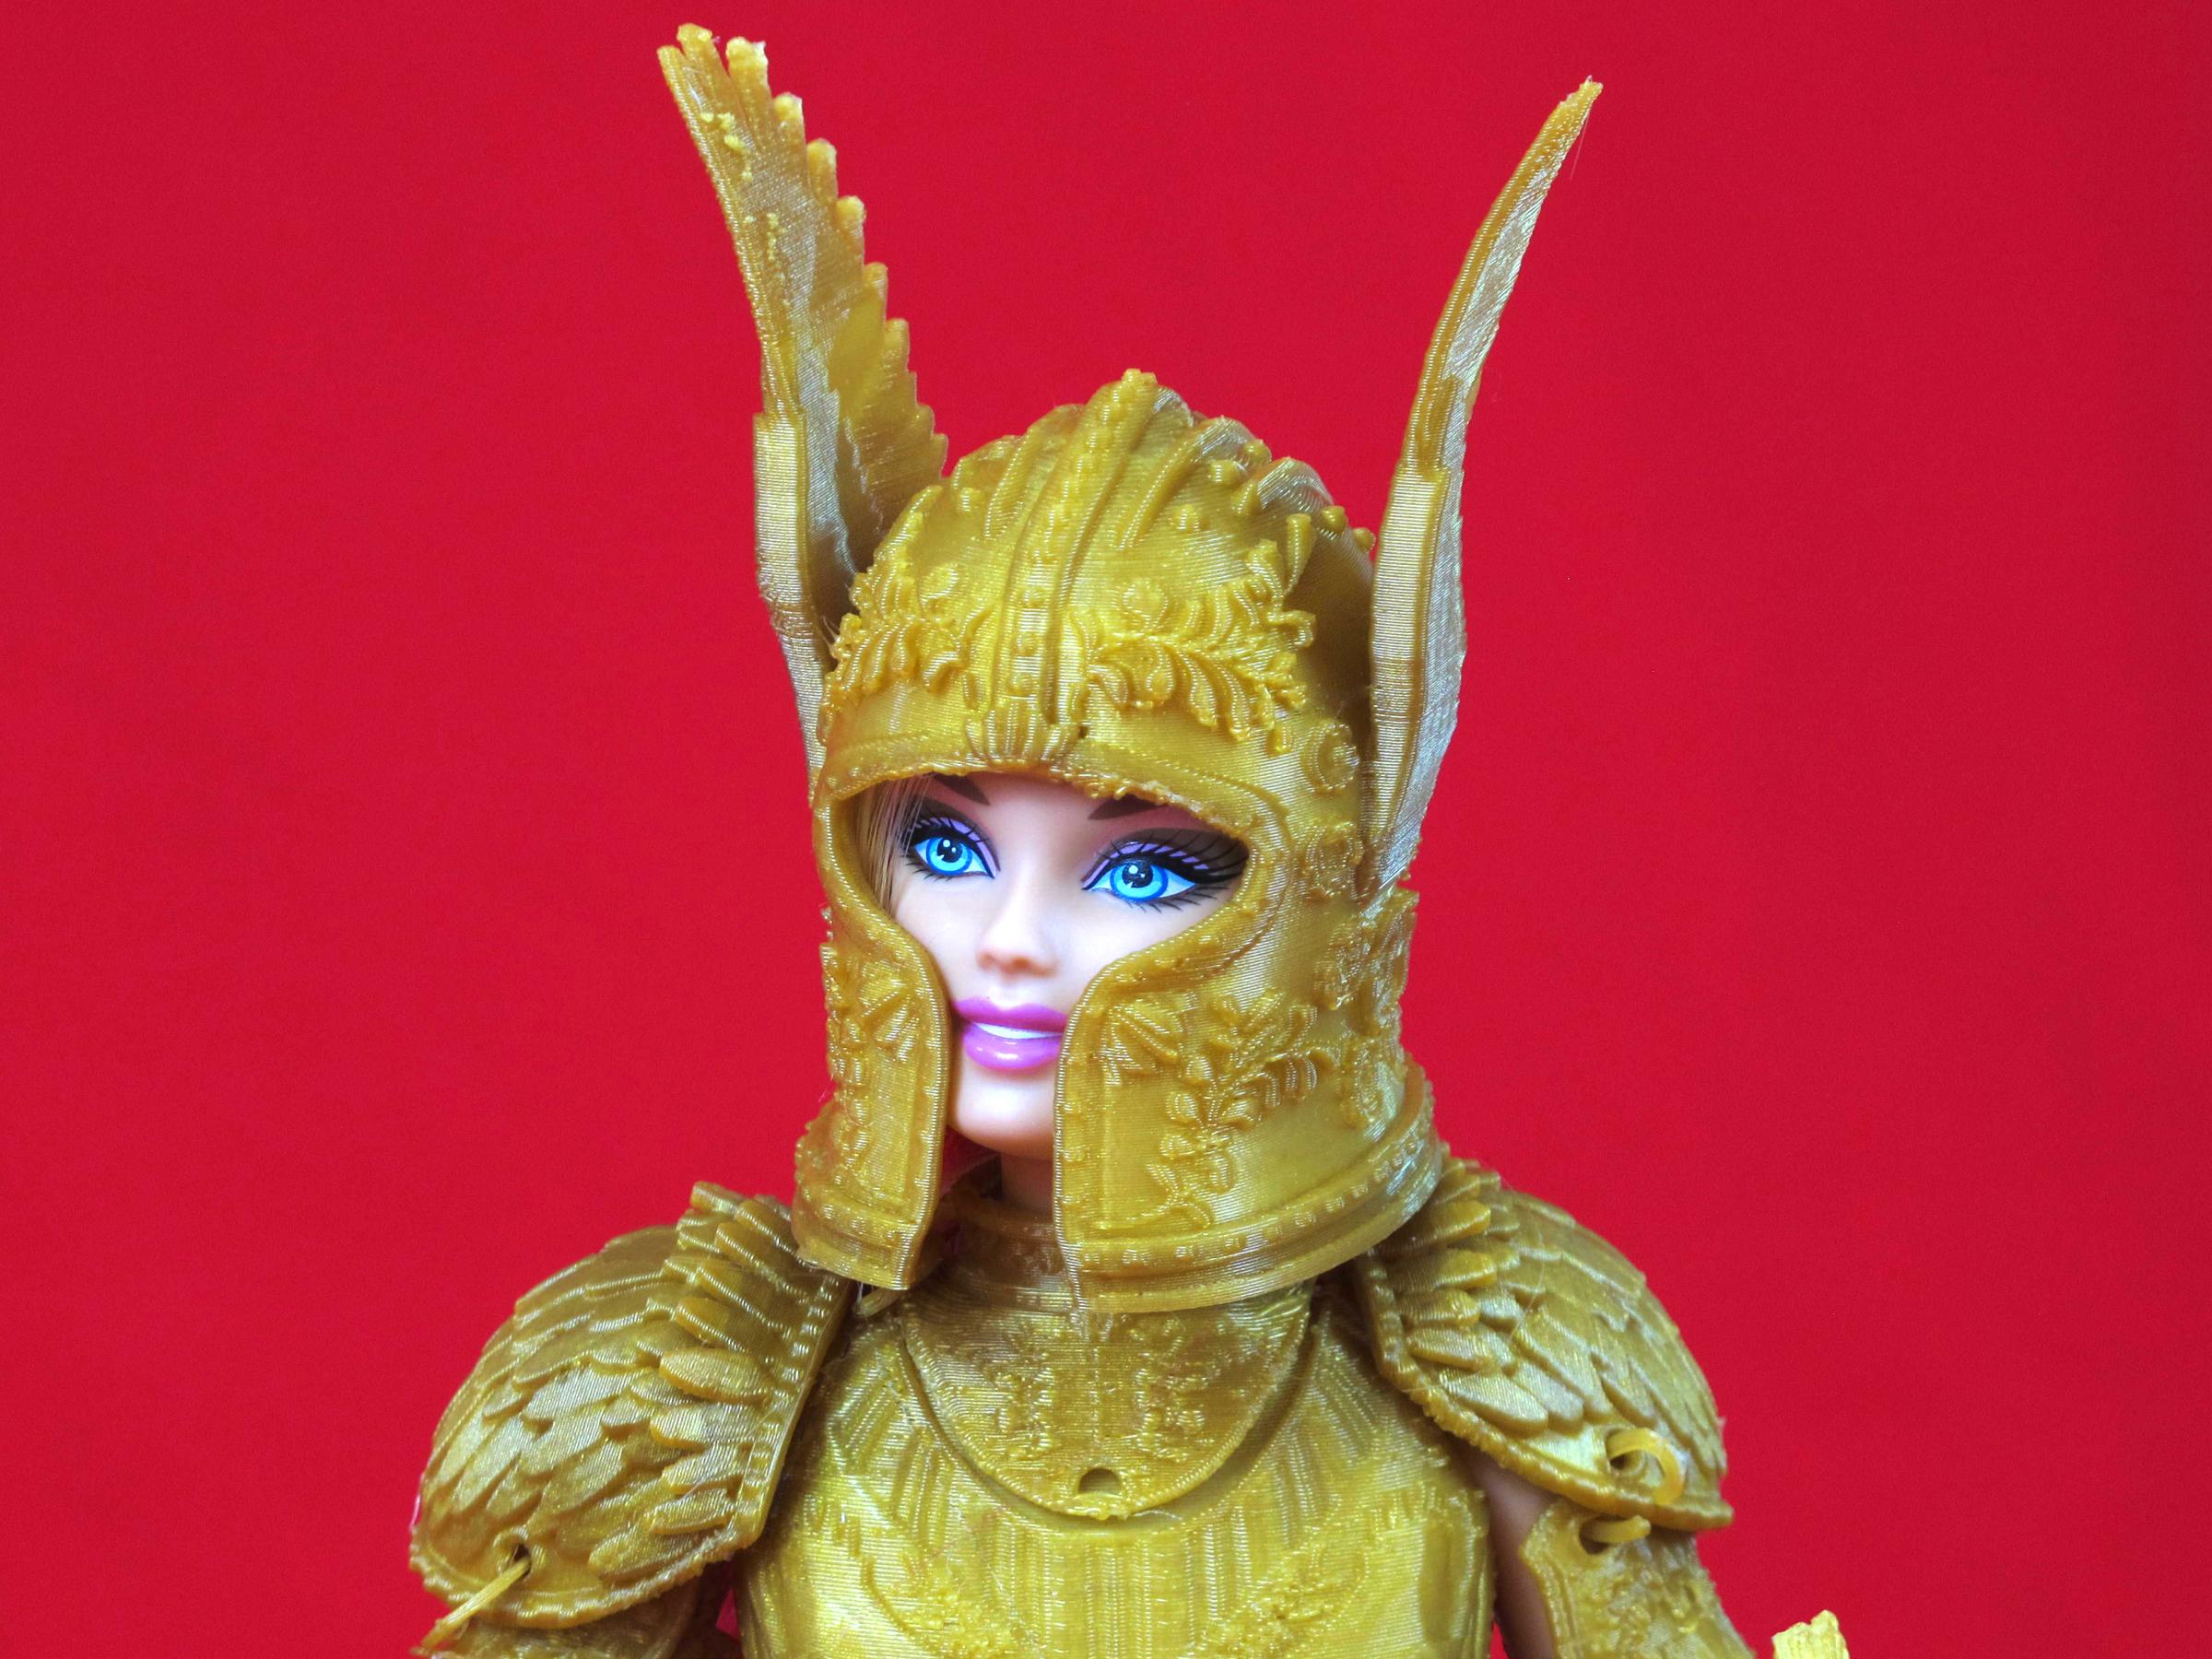 The helmet of the gold suit of armor in the "Faire Play" battle set. A rose garden pattern is repeated throughout the armor.